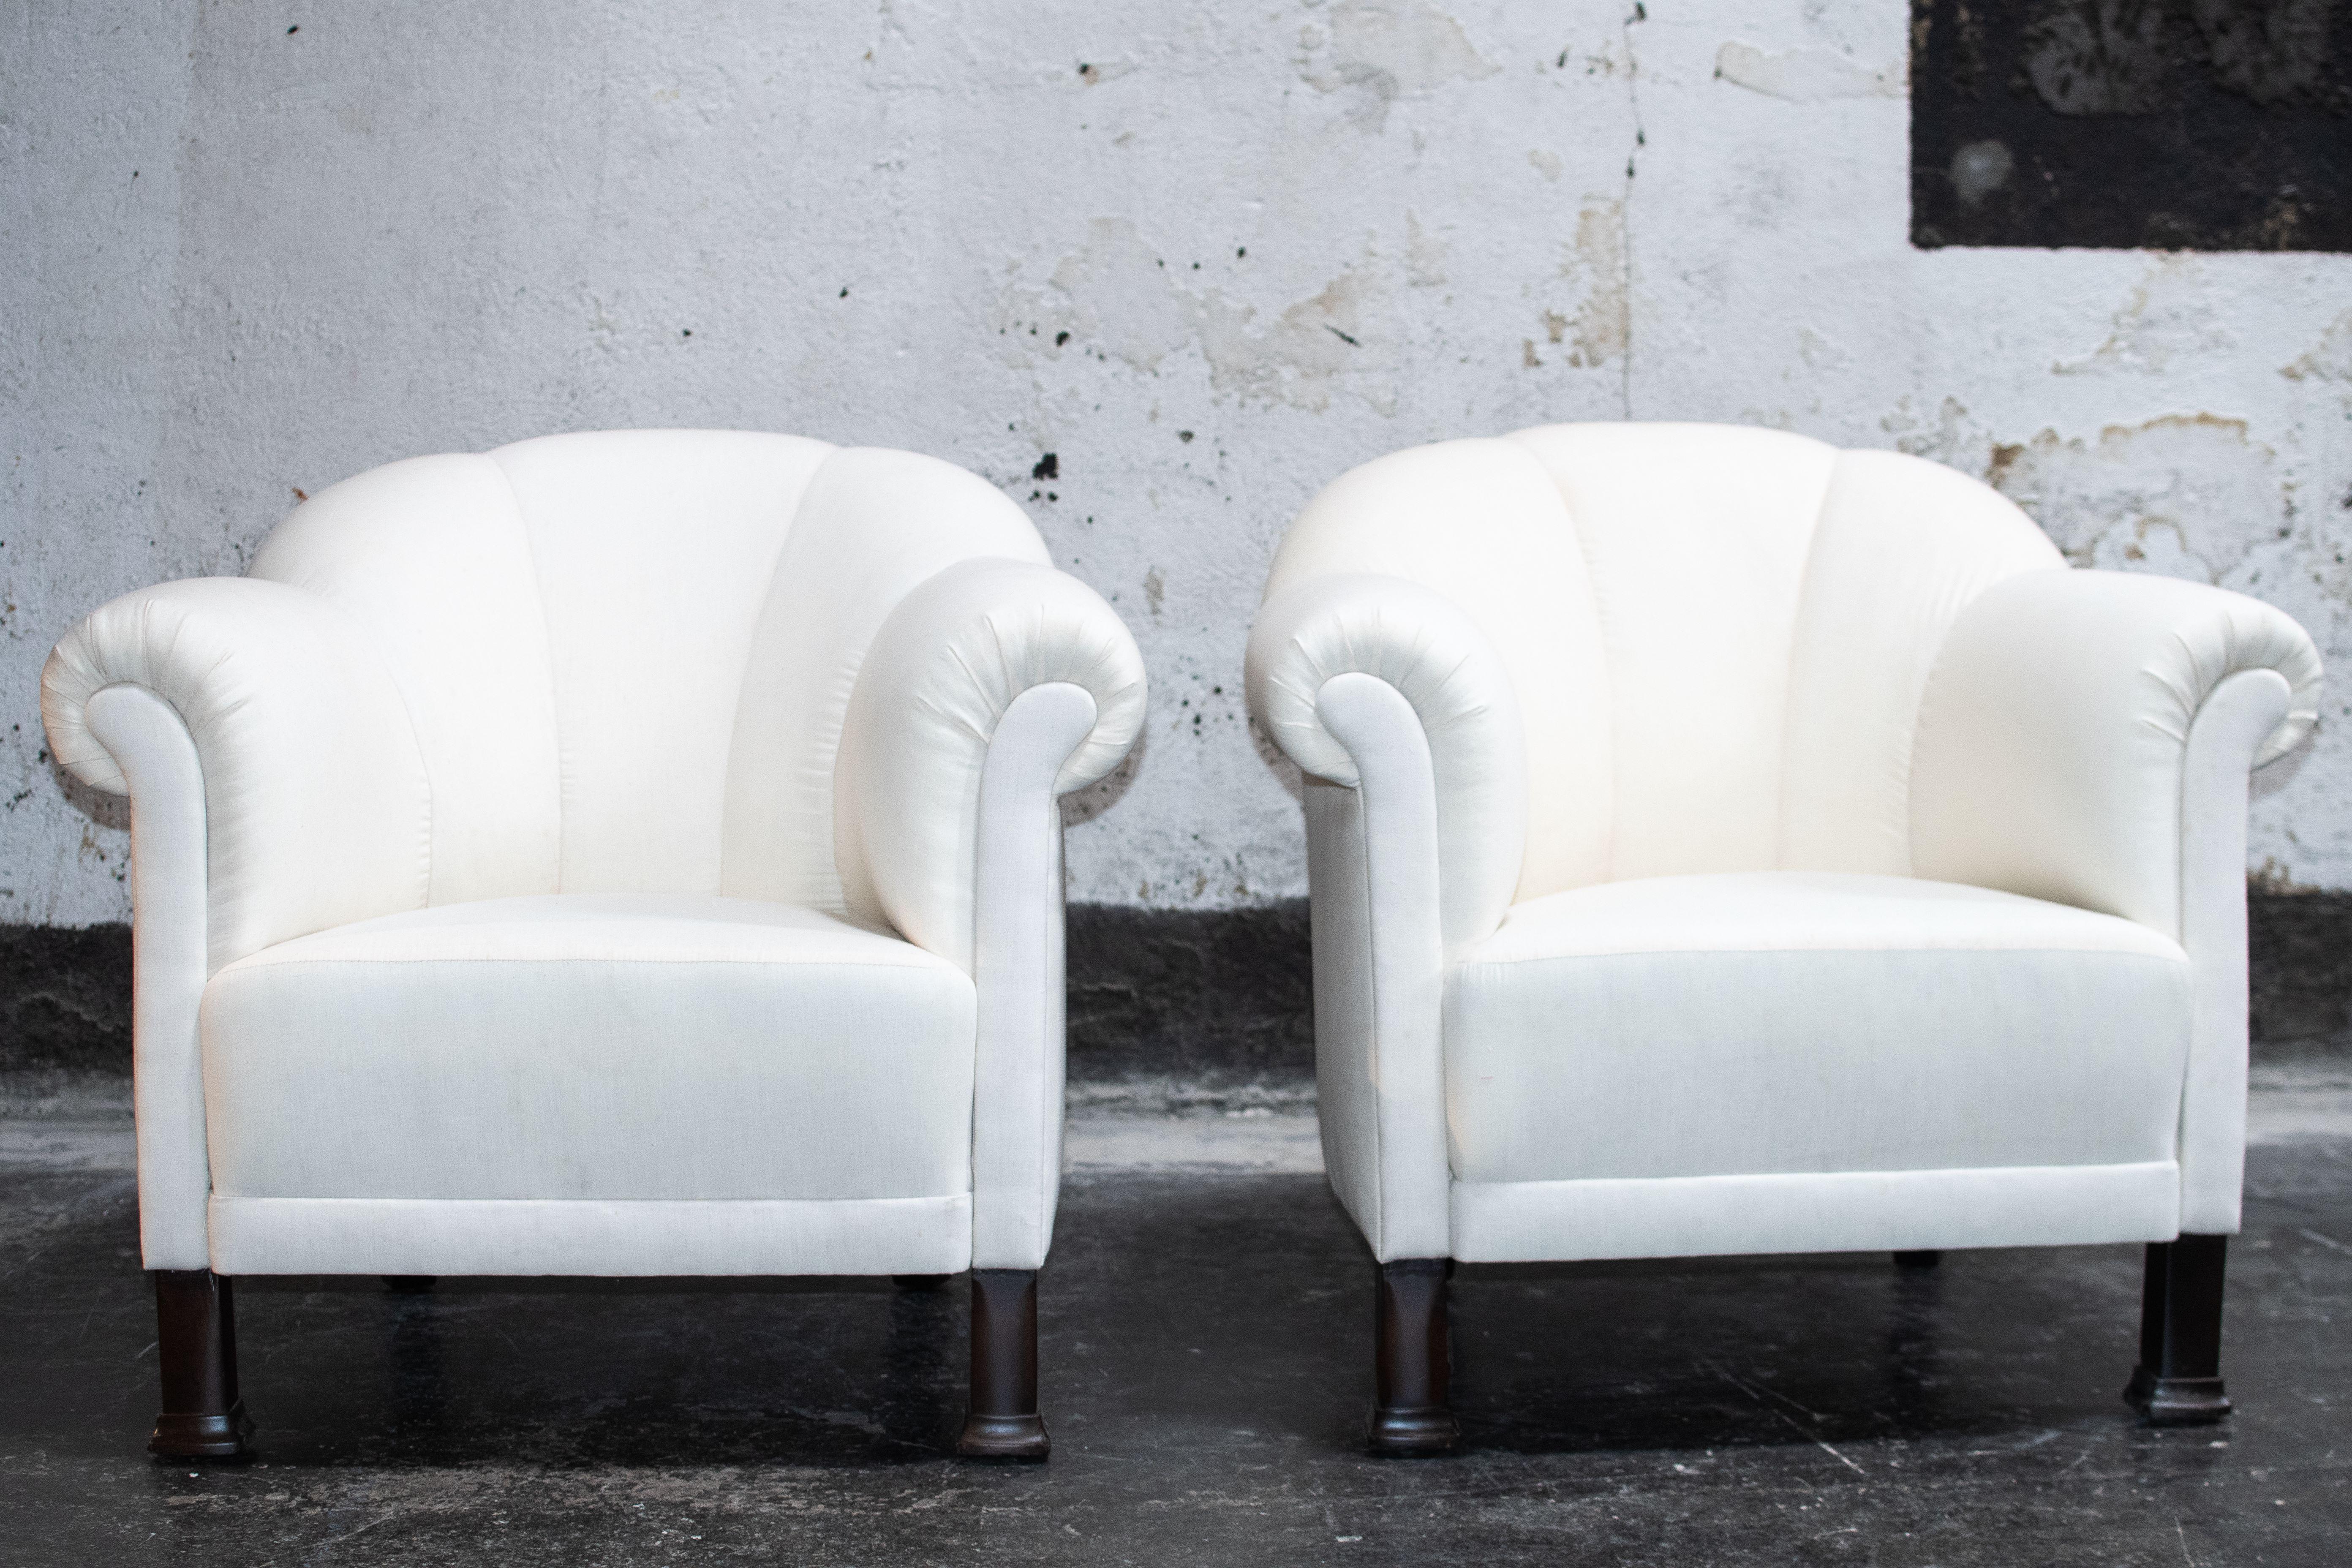 Pair of Swedish Art Deco club chairs. Featuring traditional Art Deco elements such as a deep seat, a channeled barrel back, and rolled arms. Restored by our team of craftsmen while maintaining the vintage integrity of the piece. They have been